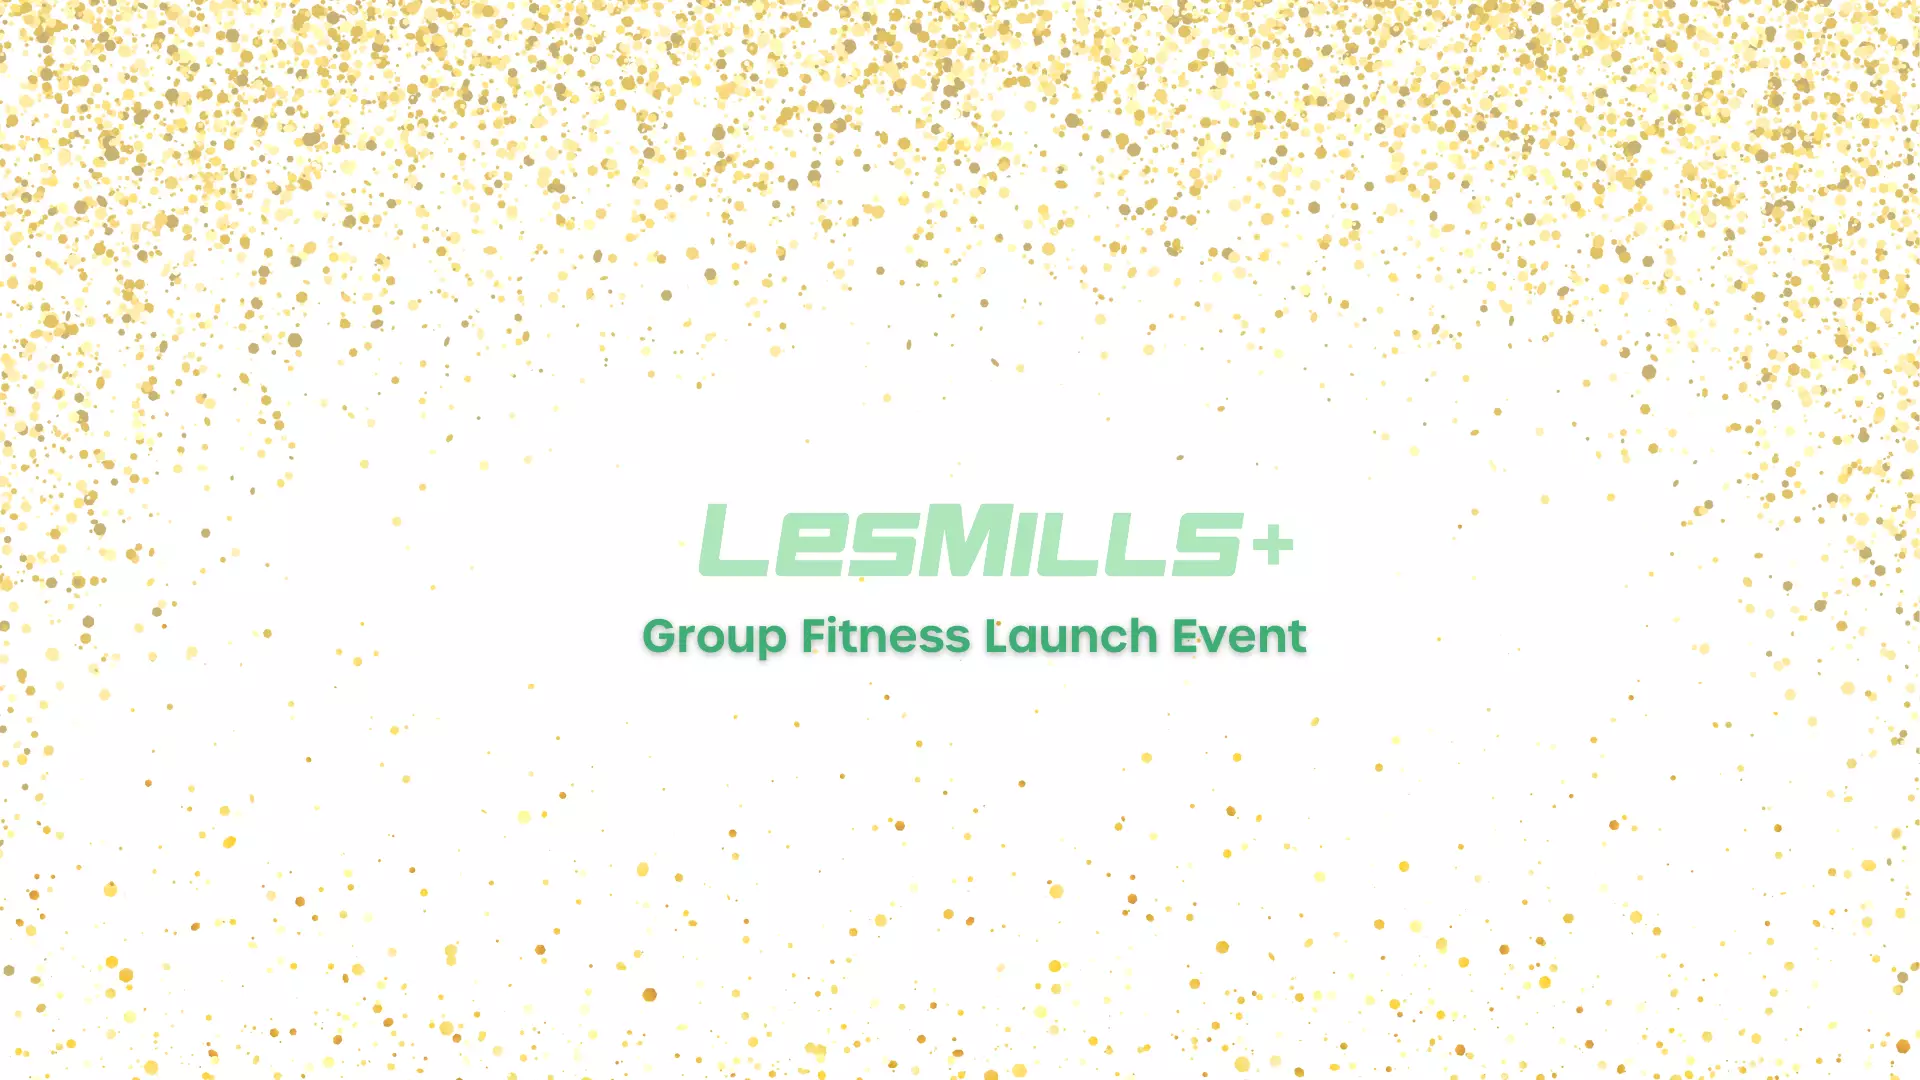 Group Fitness Launch Event